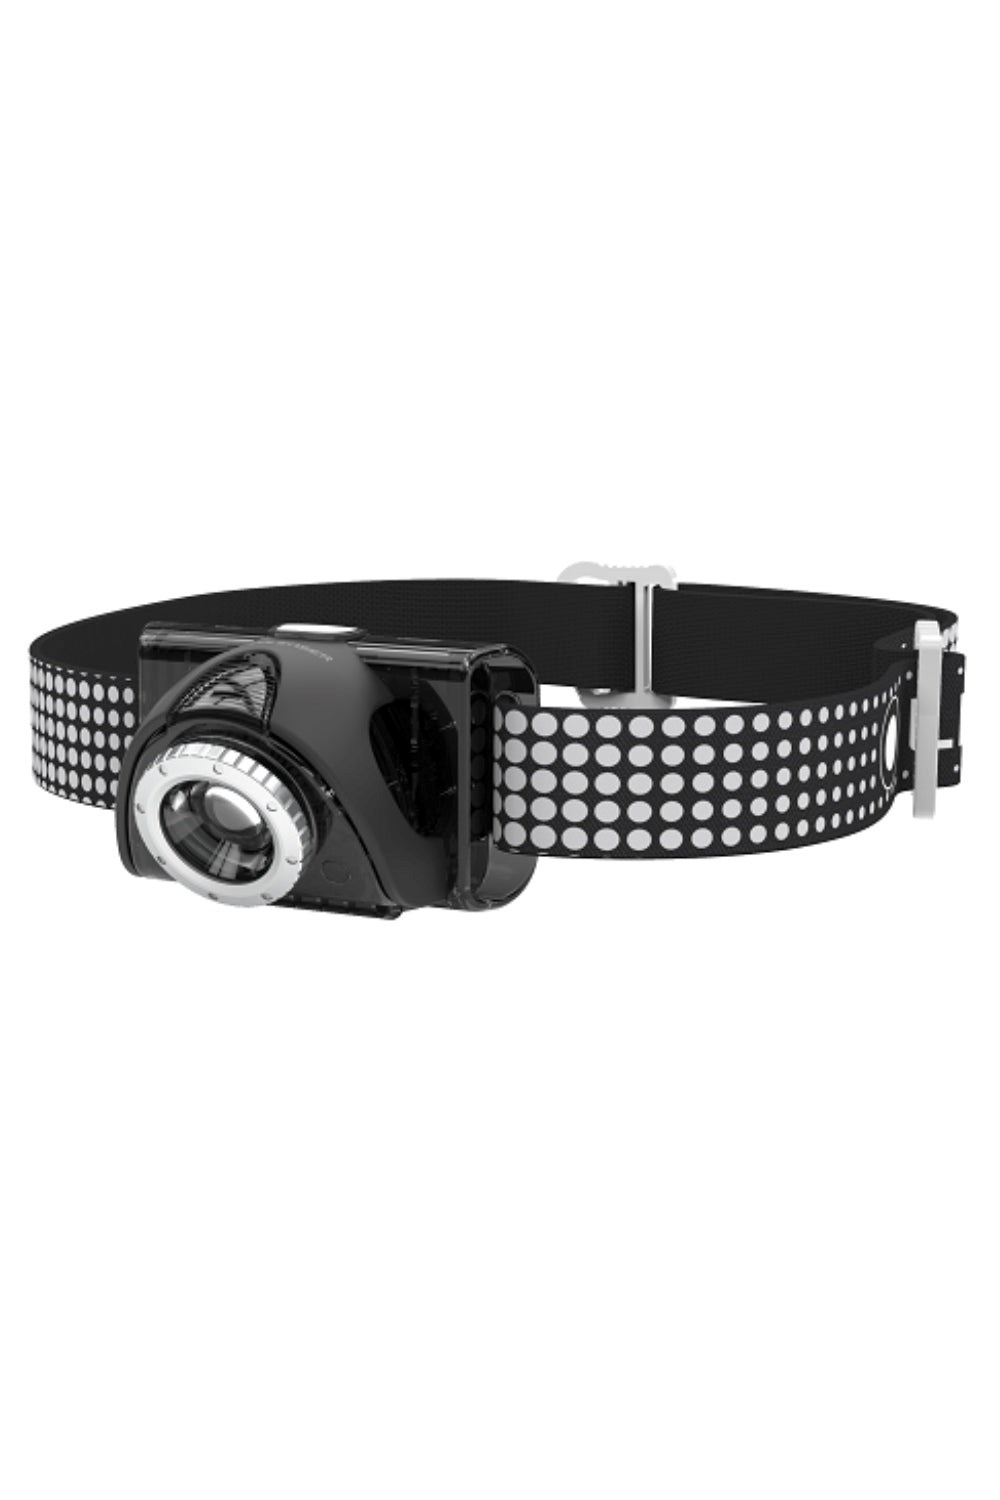 SEO7R Rechargable 220lm Outdoor LED Head Torch -